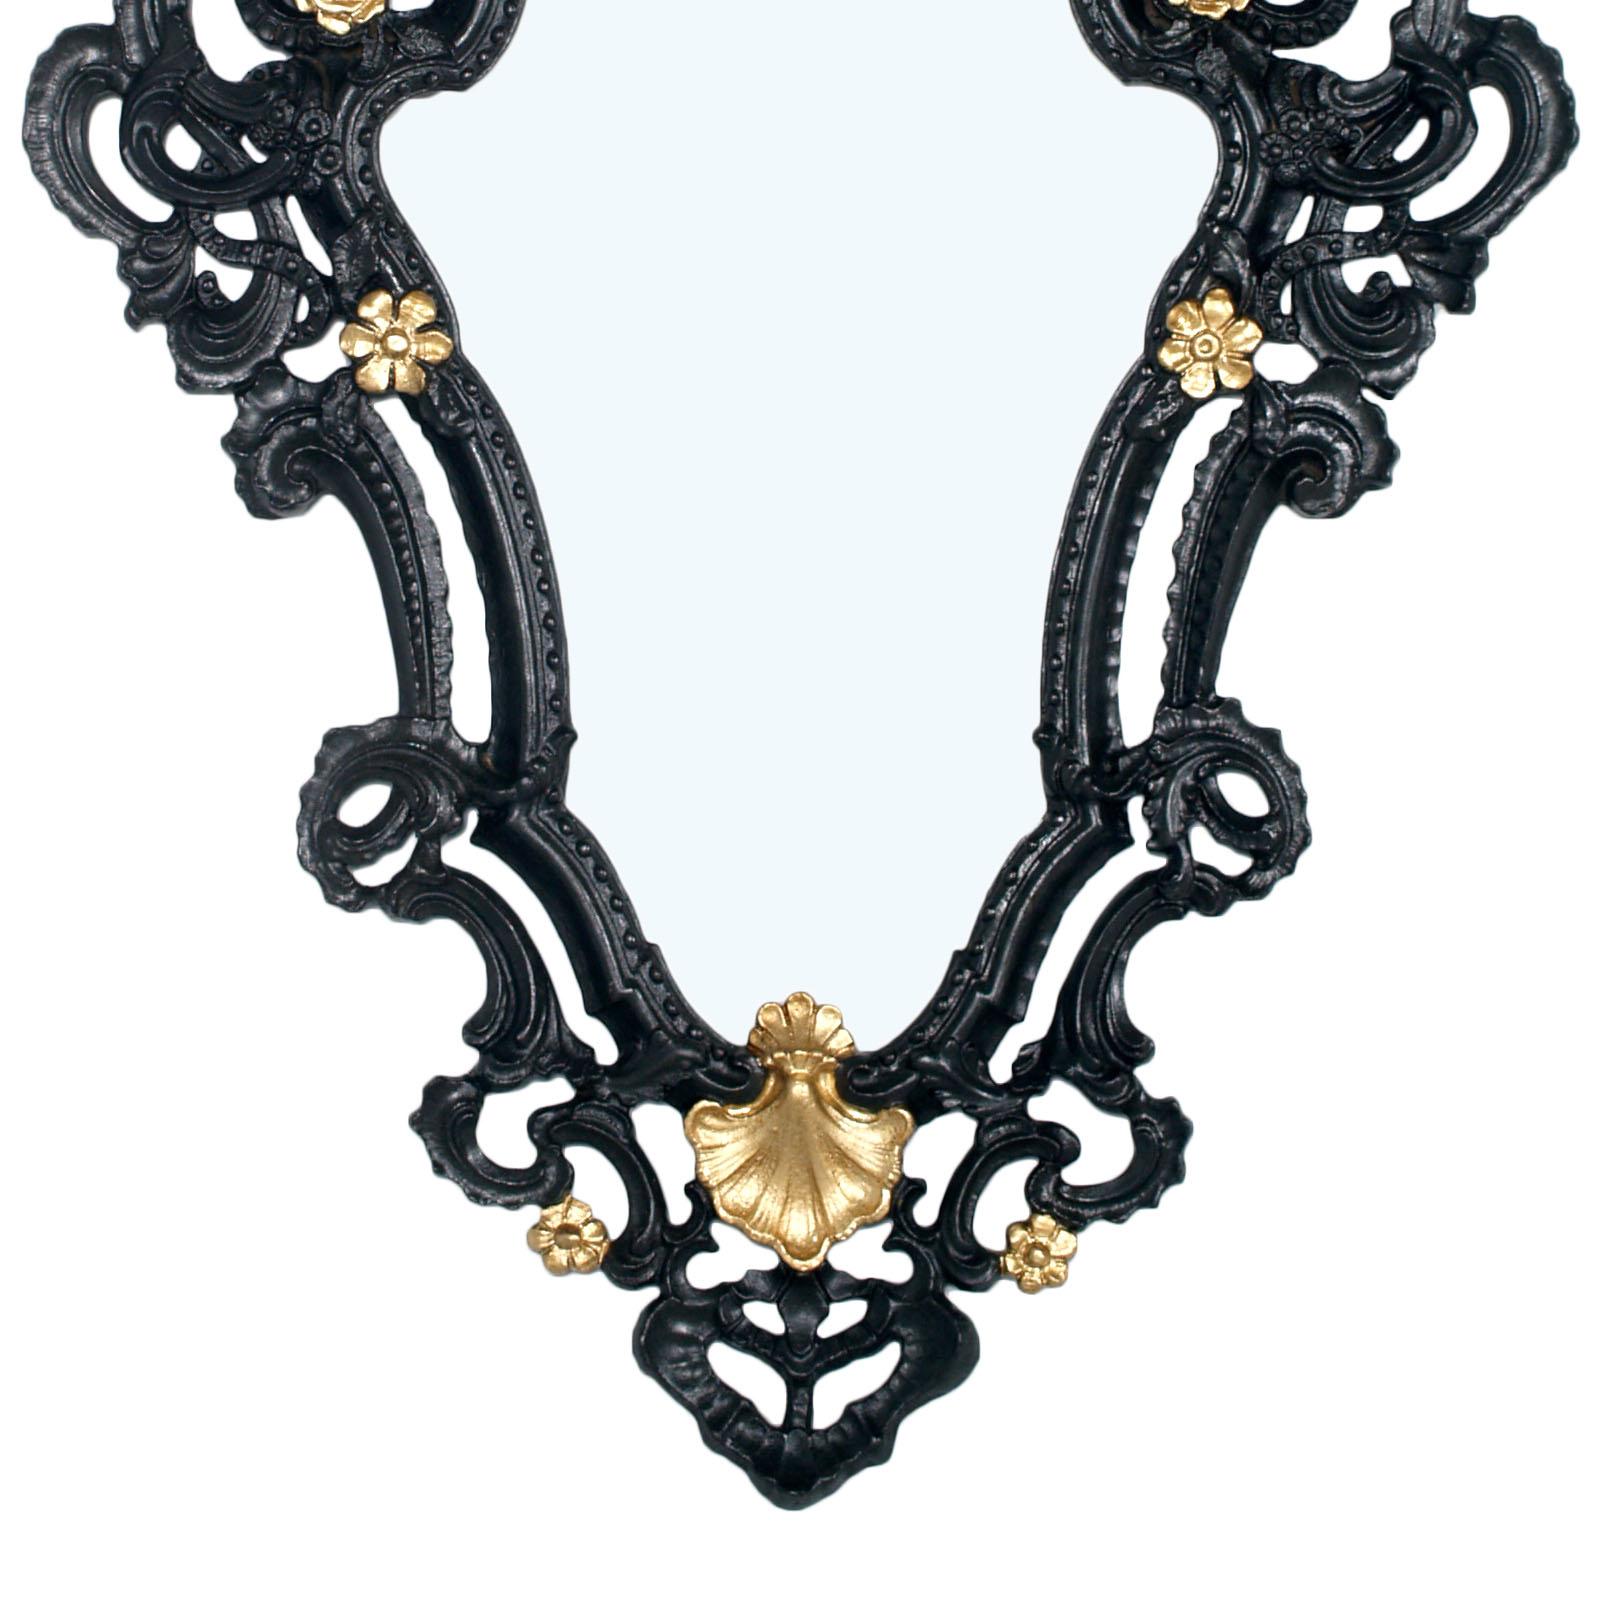 Rococo 1940s Venetian Rococò Style Wall Mirror in pressed Wood Black and Gold Laquered For Sale